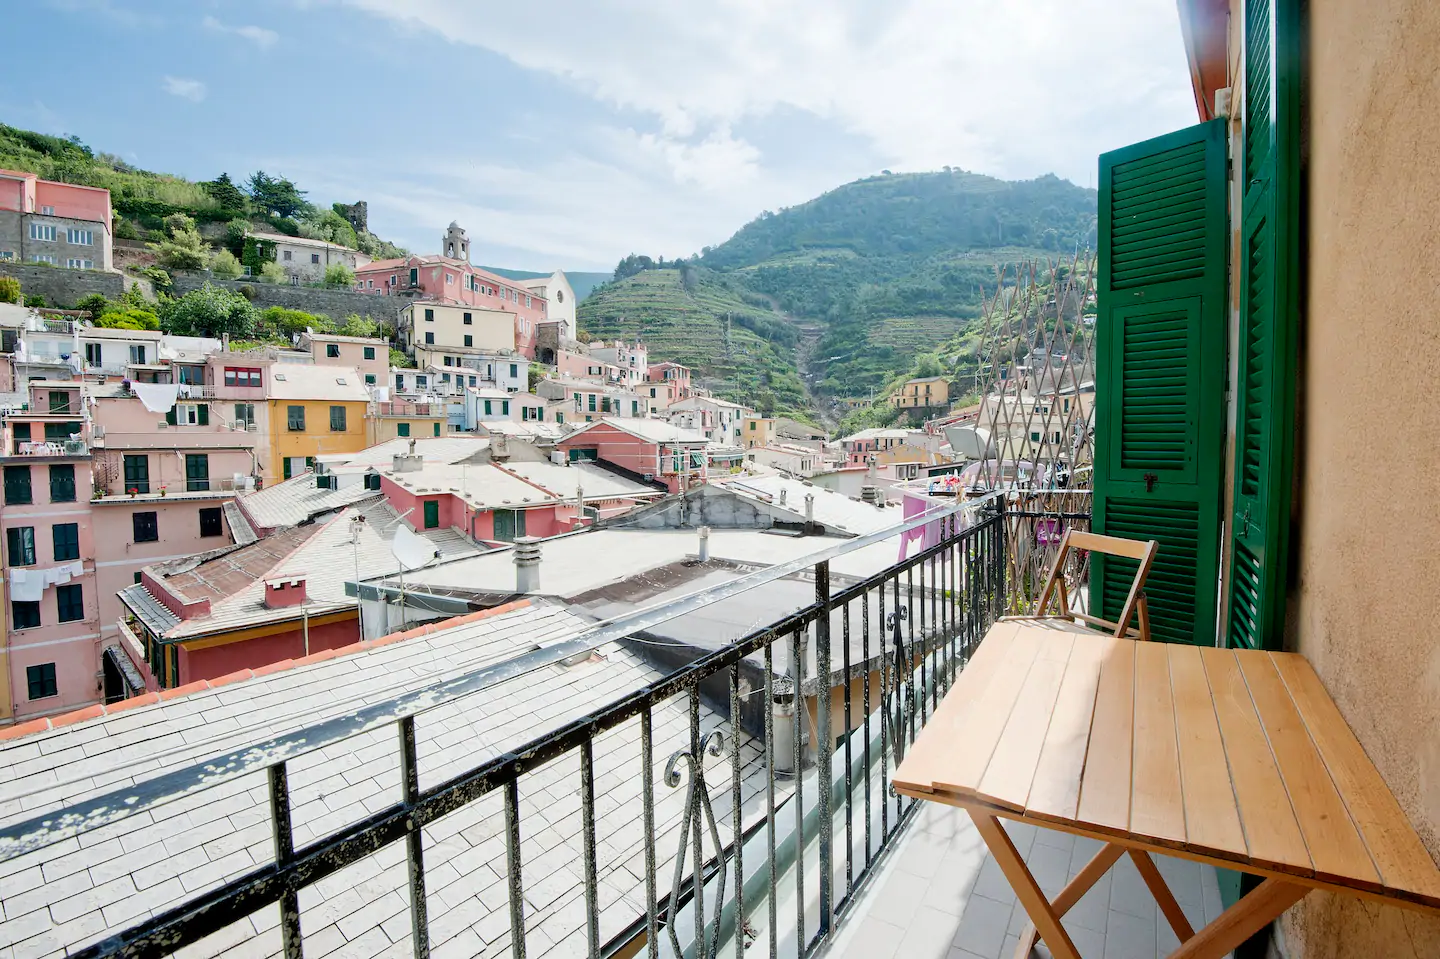 Airbnb in Italy with amazing views of Cinque Terre